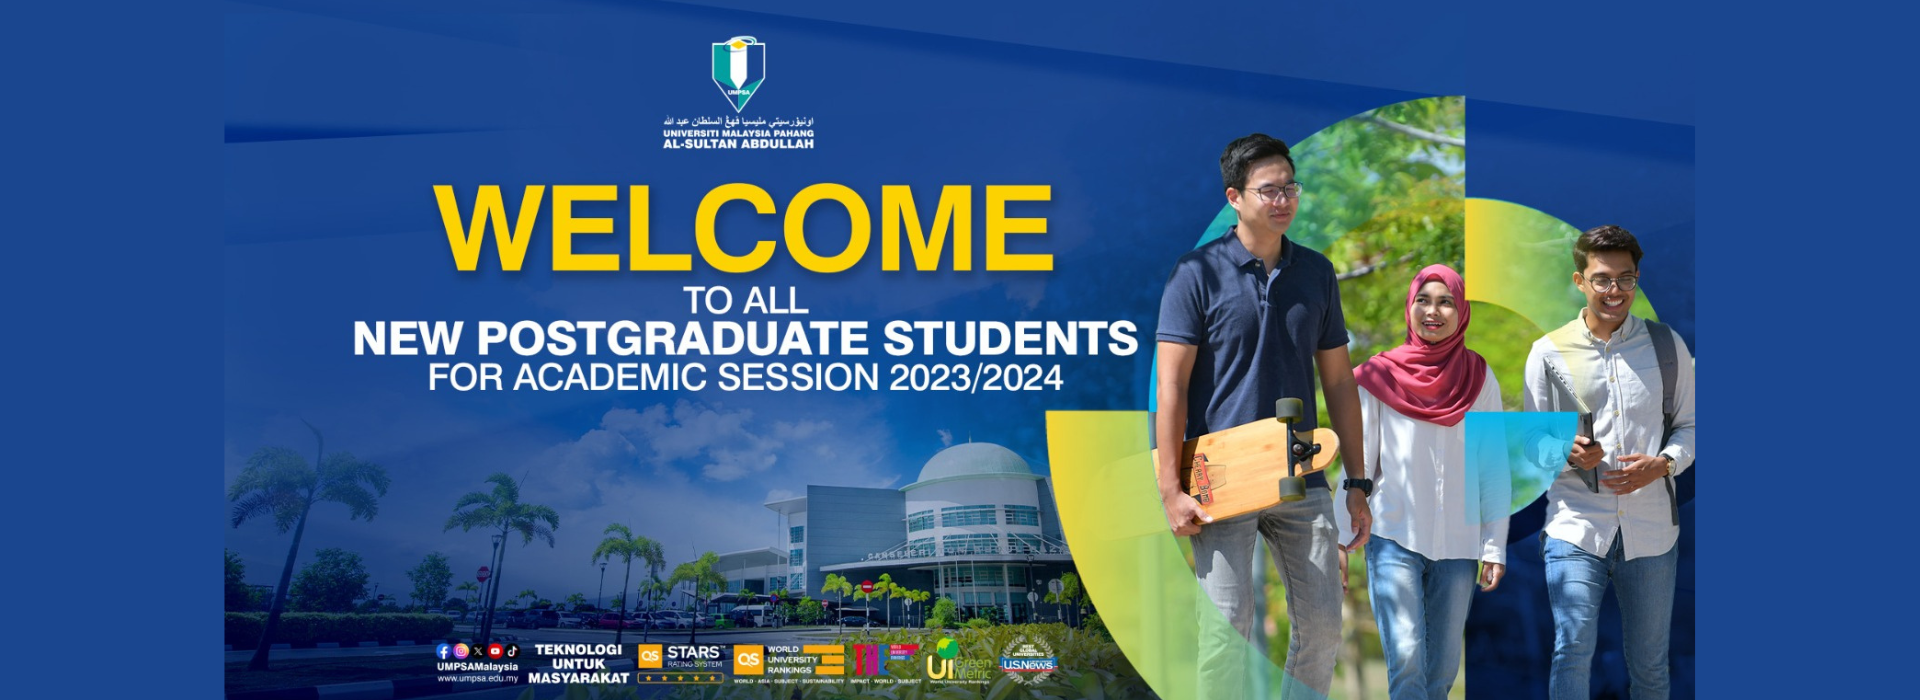 Welcome to All New Postgraduate Students